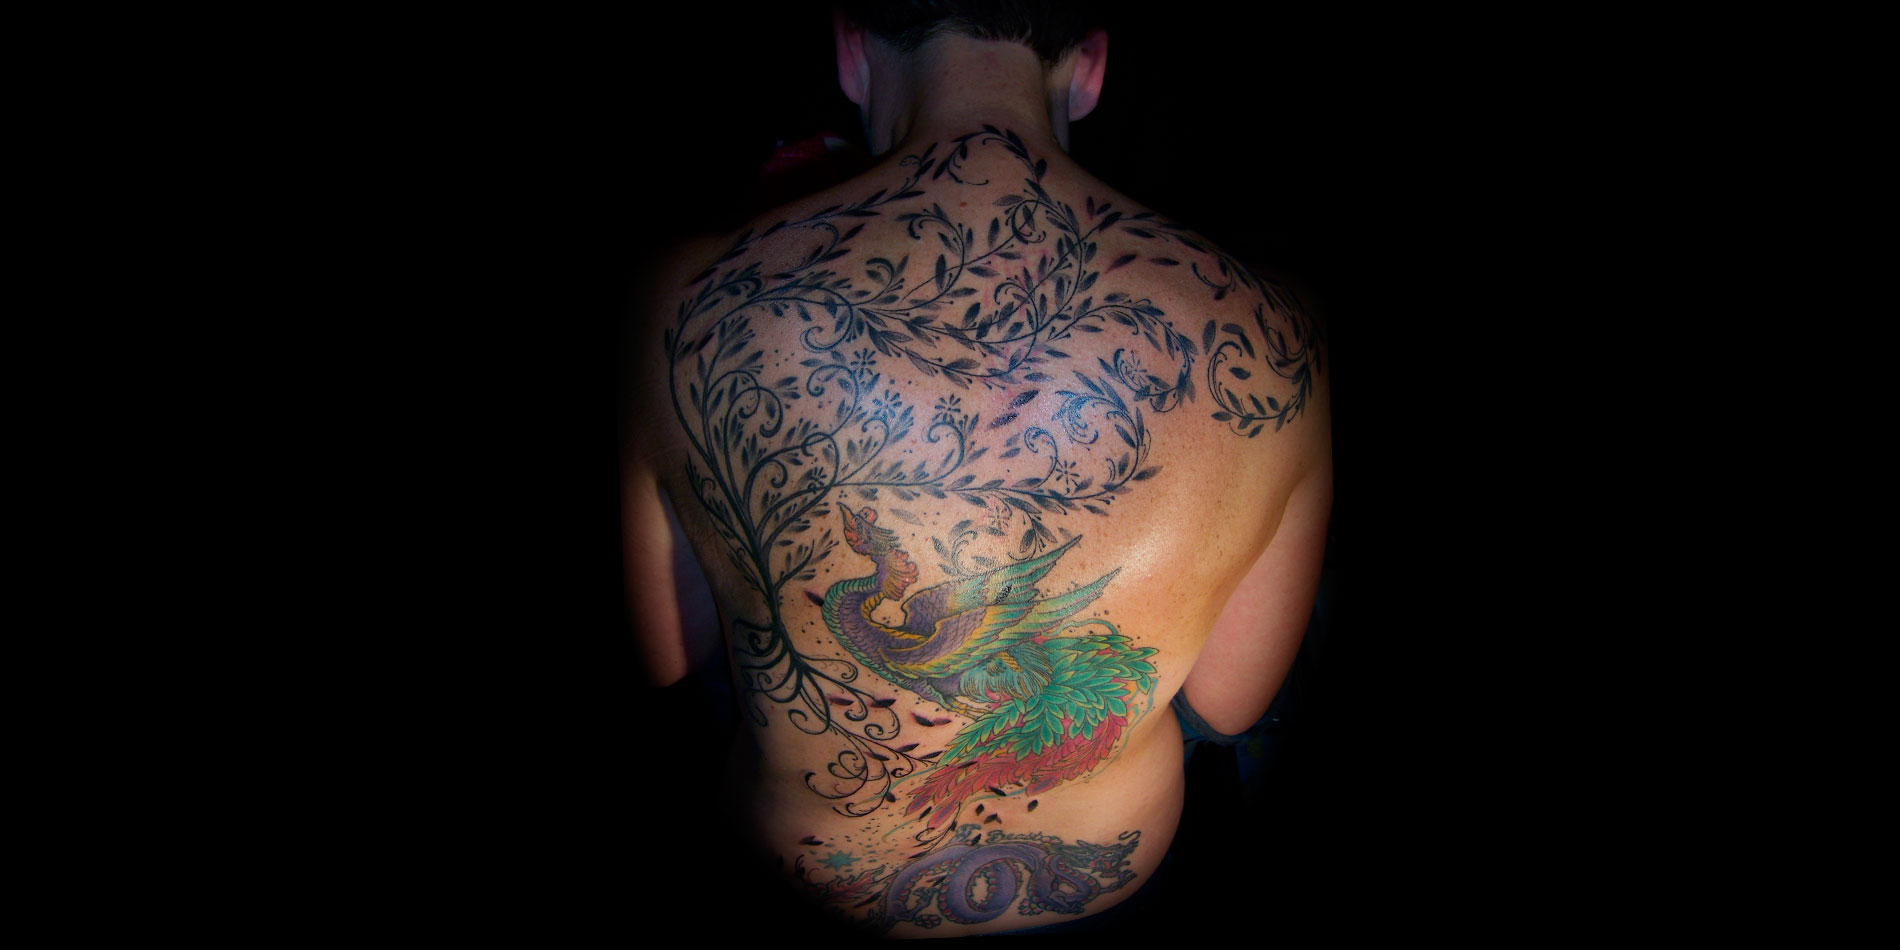 phoenix back tattoo with tree done in chiang mai thialand